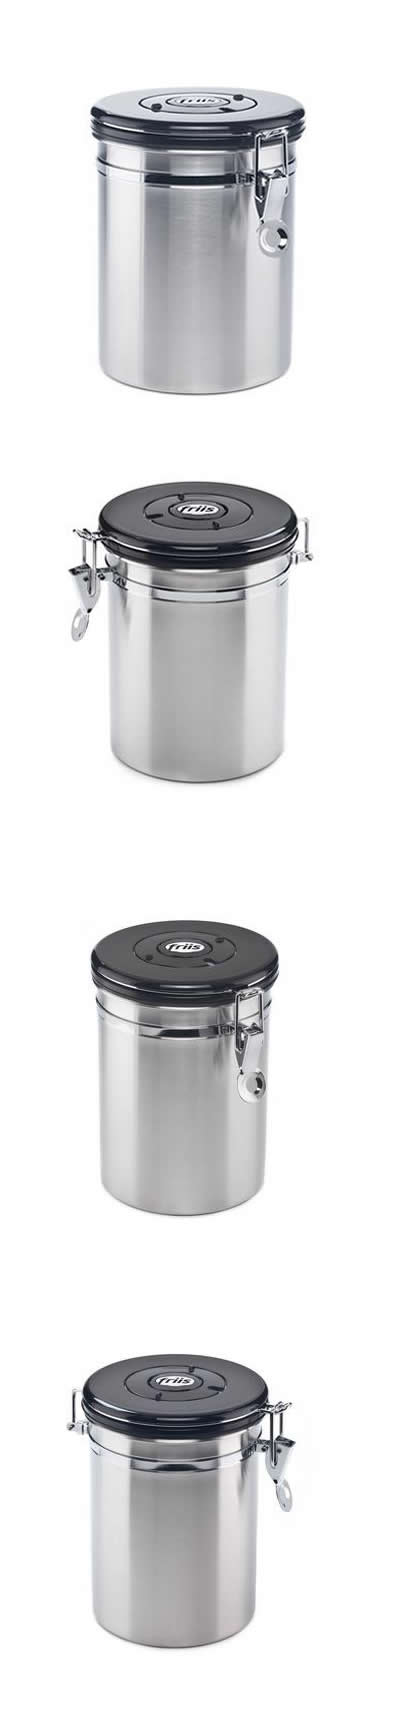 Stainless Steel canister